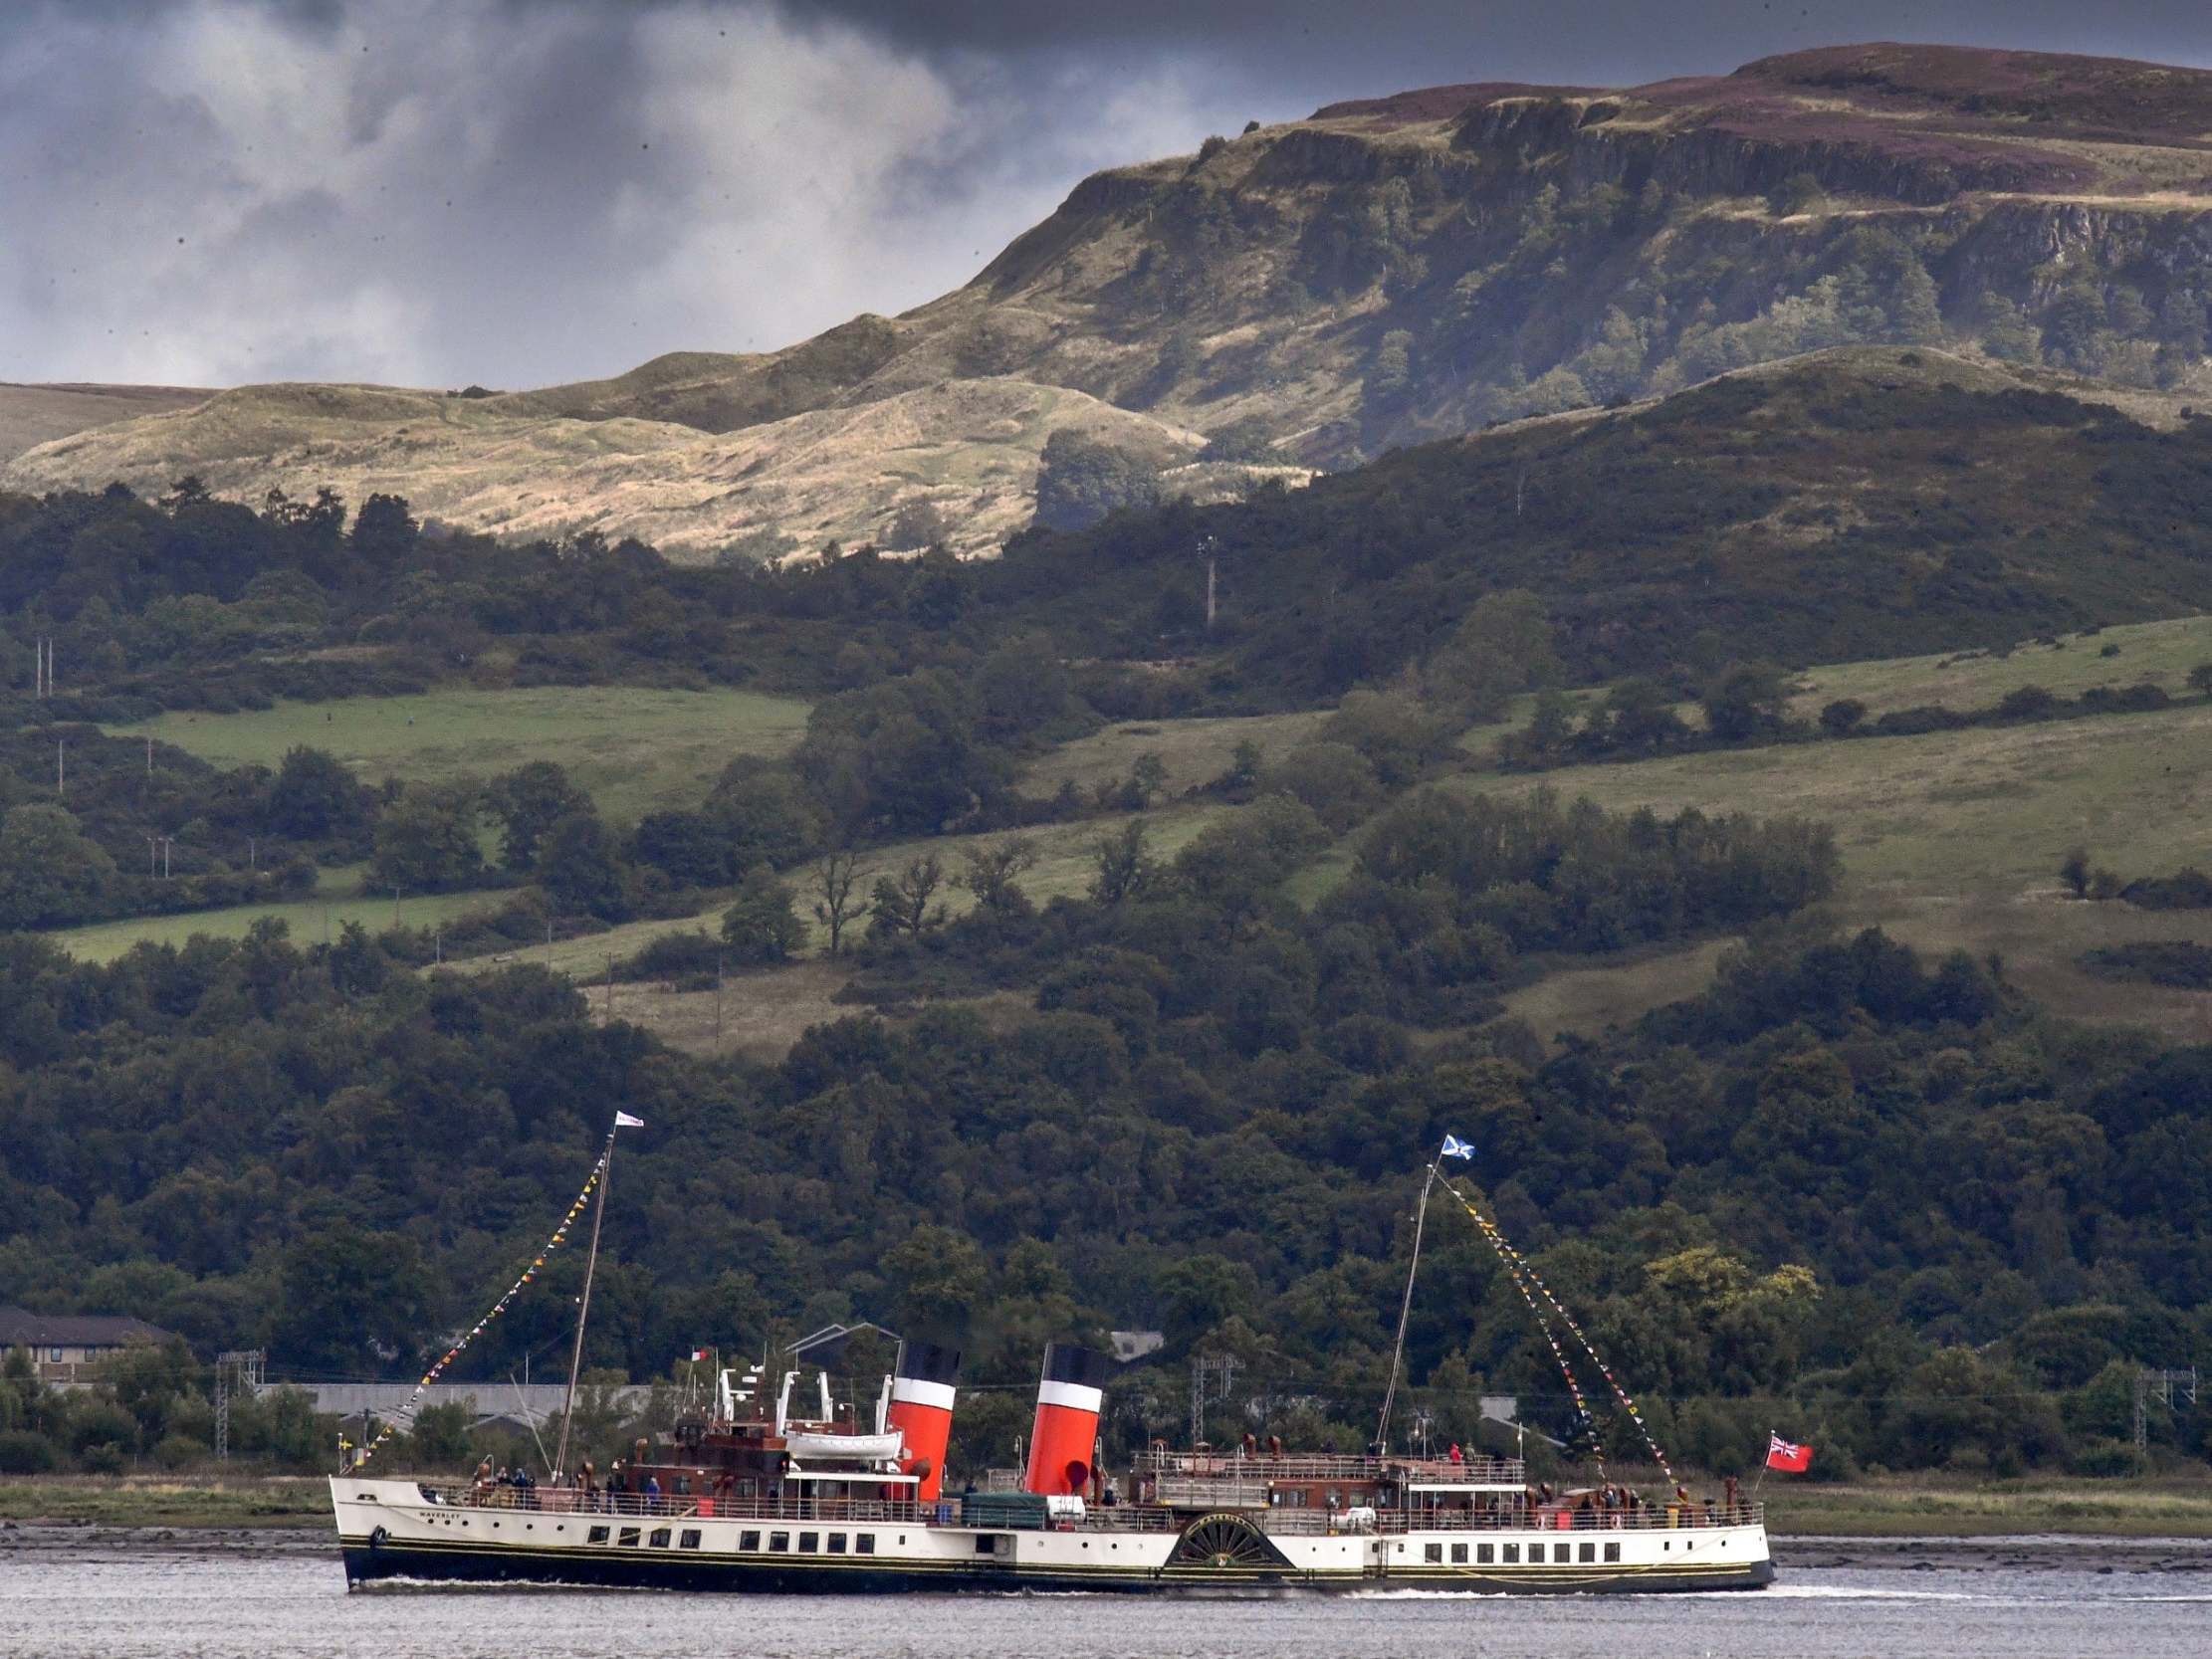 The Waverley paddle steamer returns to sailing on the Clyde following a successful campaign to raise £2.3m for new boilers, on 22 August